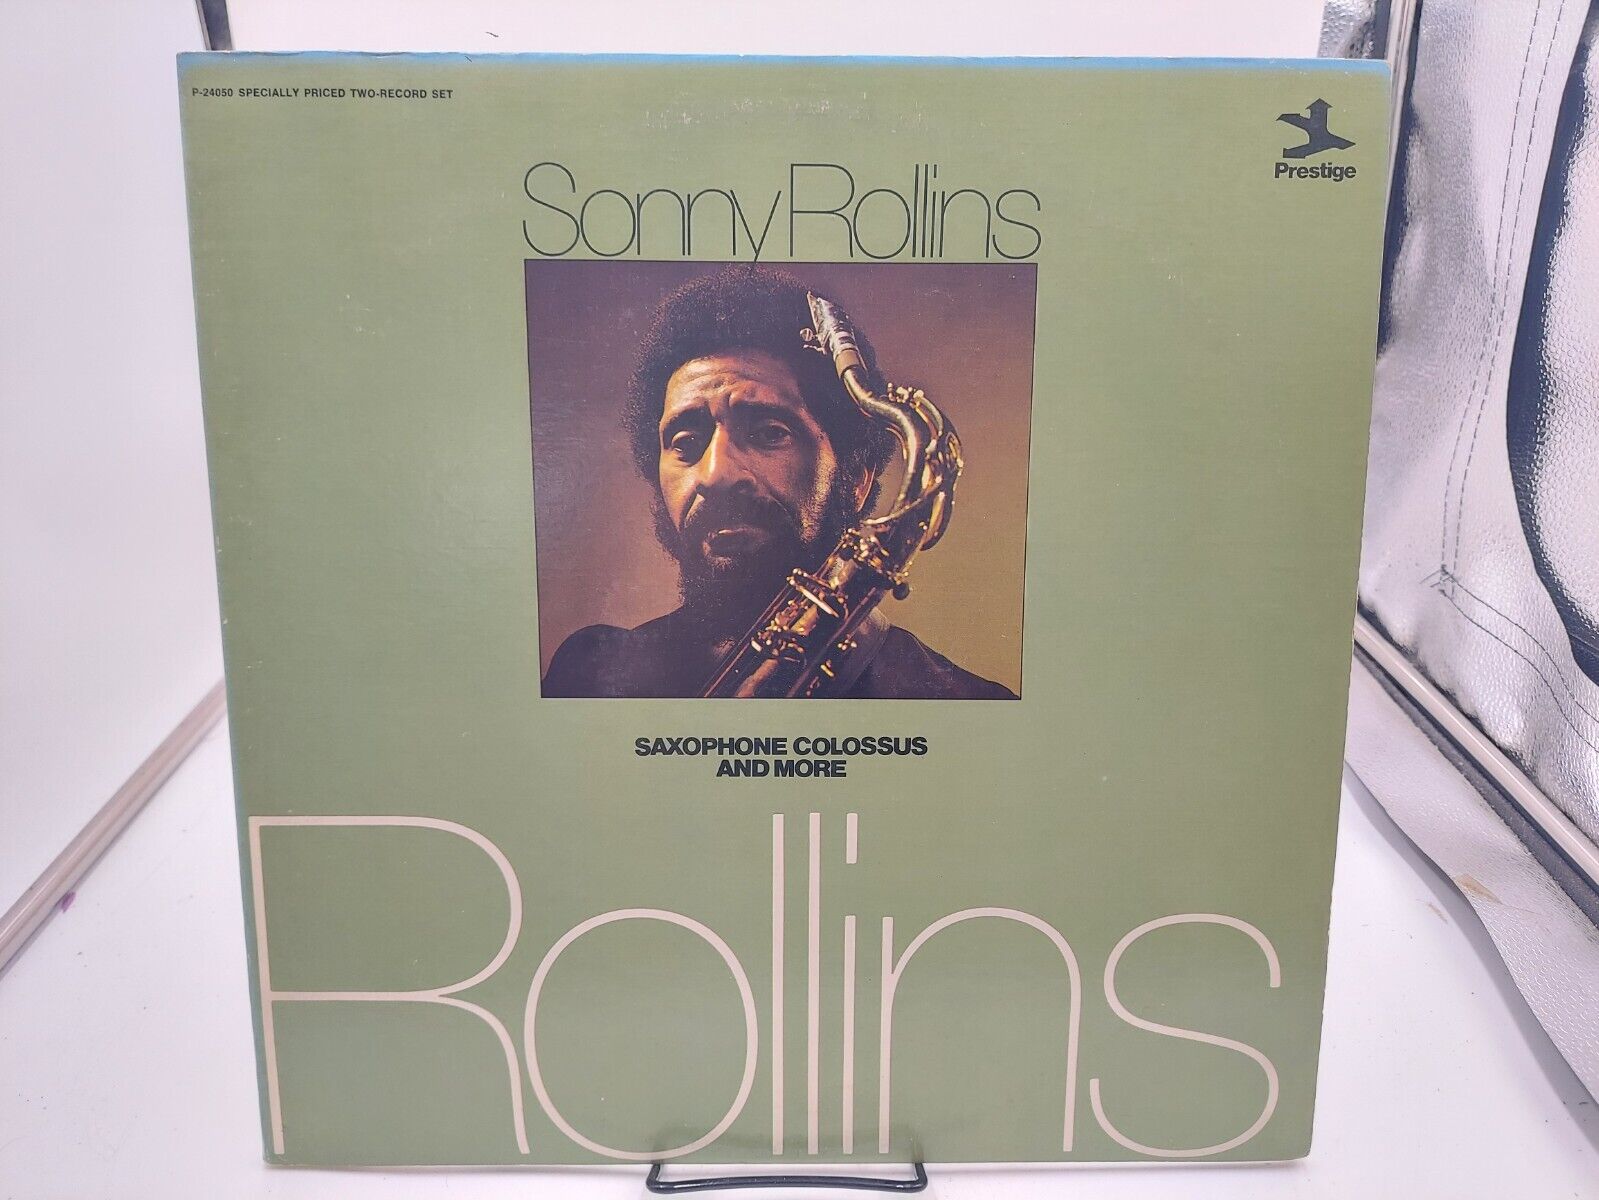 SONNY ROLLINS Saxophone Colossus And More 1975 2LP Record Mono Ultrasonic EX